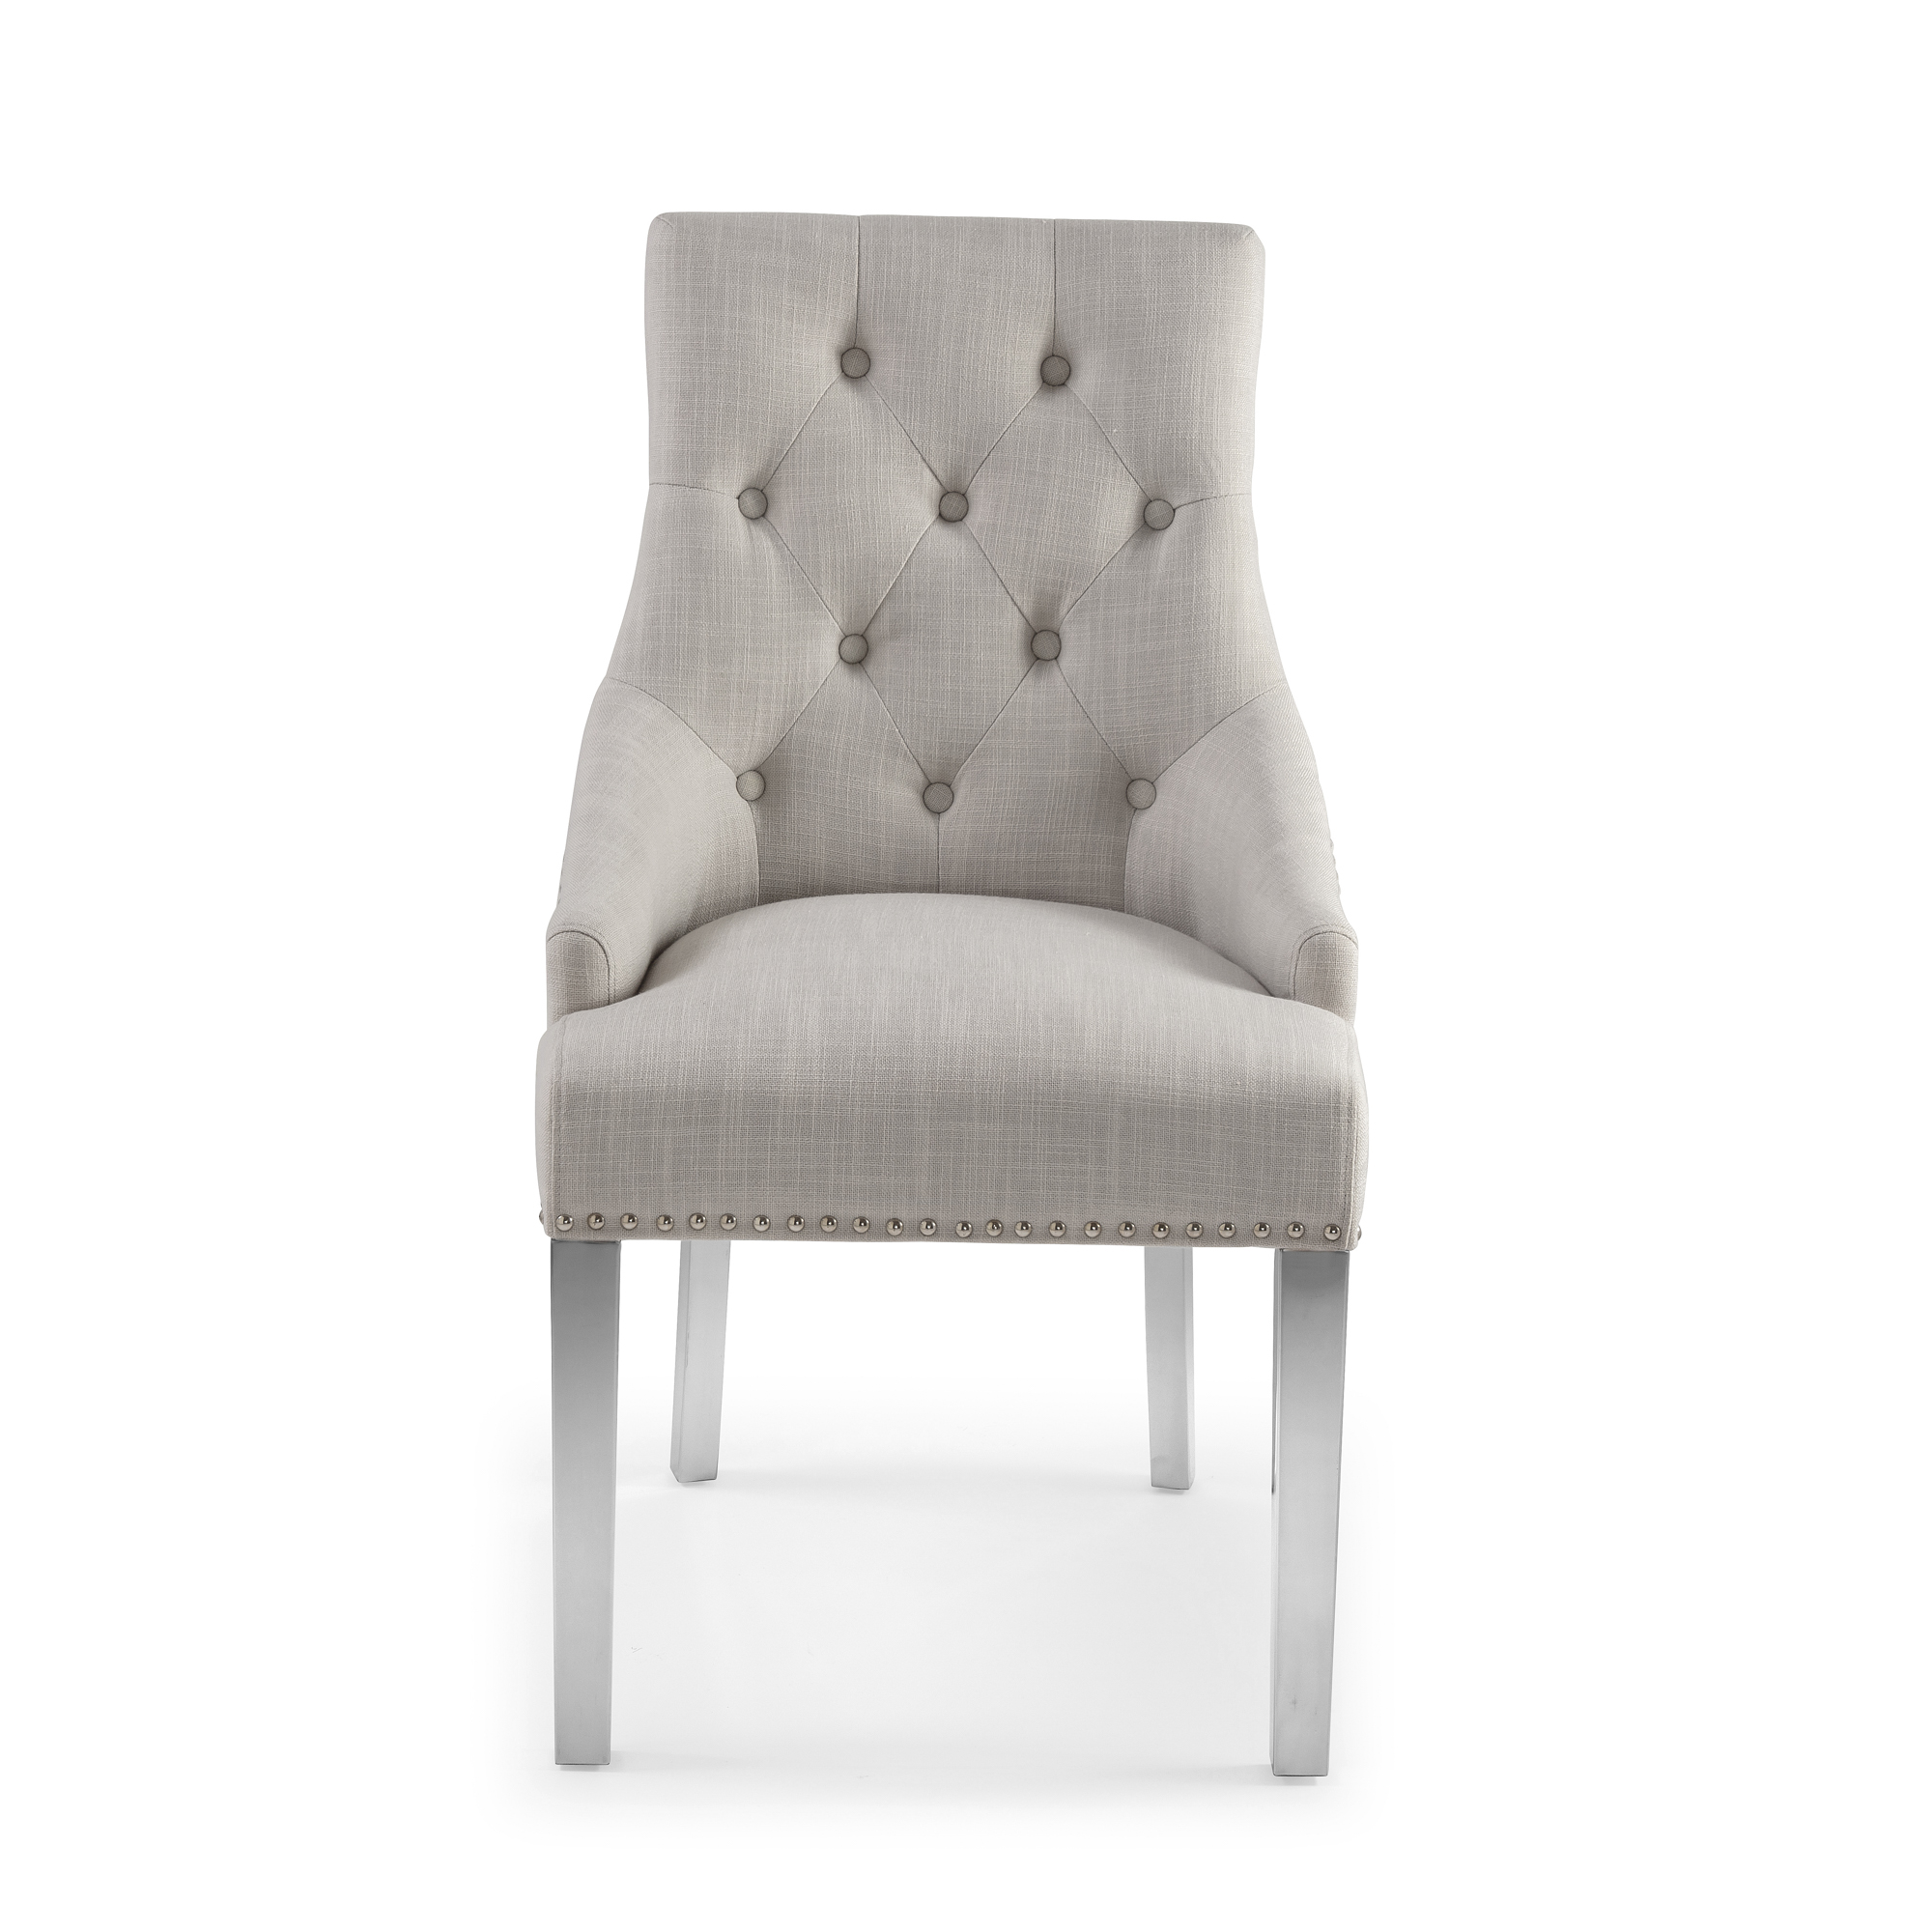 CLEARANCE: Chelsea Upholstered Scoop Dining Chair In A Natural Linen Fabric with Steel Legs